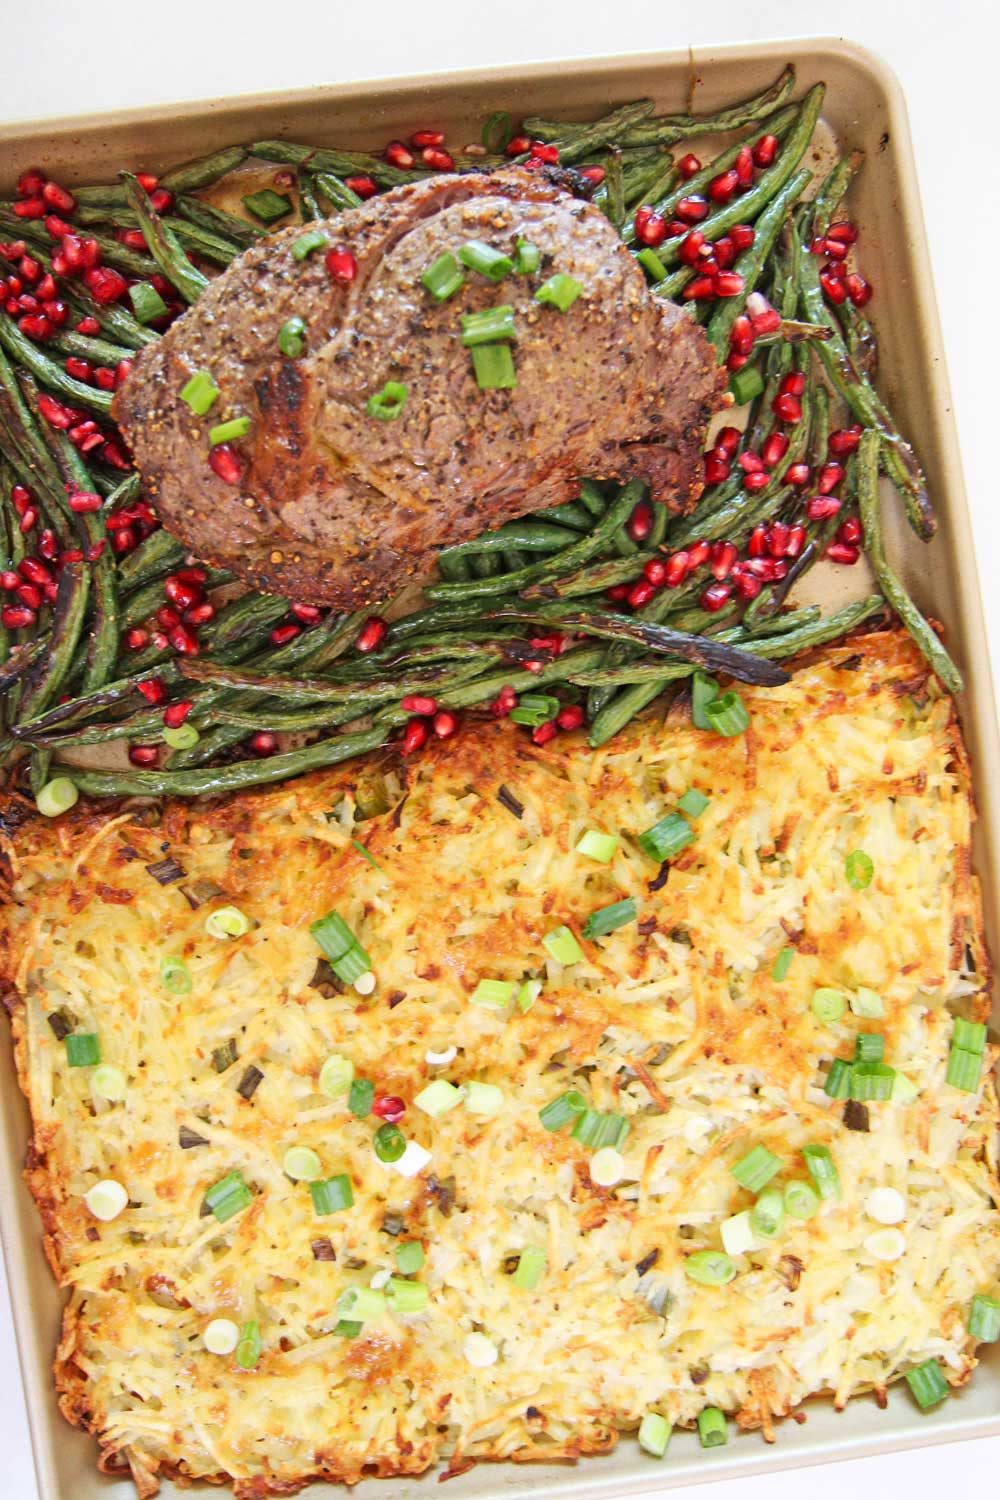 Full Holiday Dinner on a Sheet Pan. Steak and Potatoes for Christmas or Hanukkah. This is a full holiday dinner on a sheet pan. Happy Holidays! www.ChopHappy.com #Christmasdinner #sheetpandinner